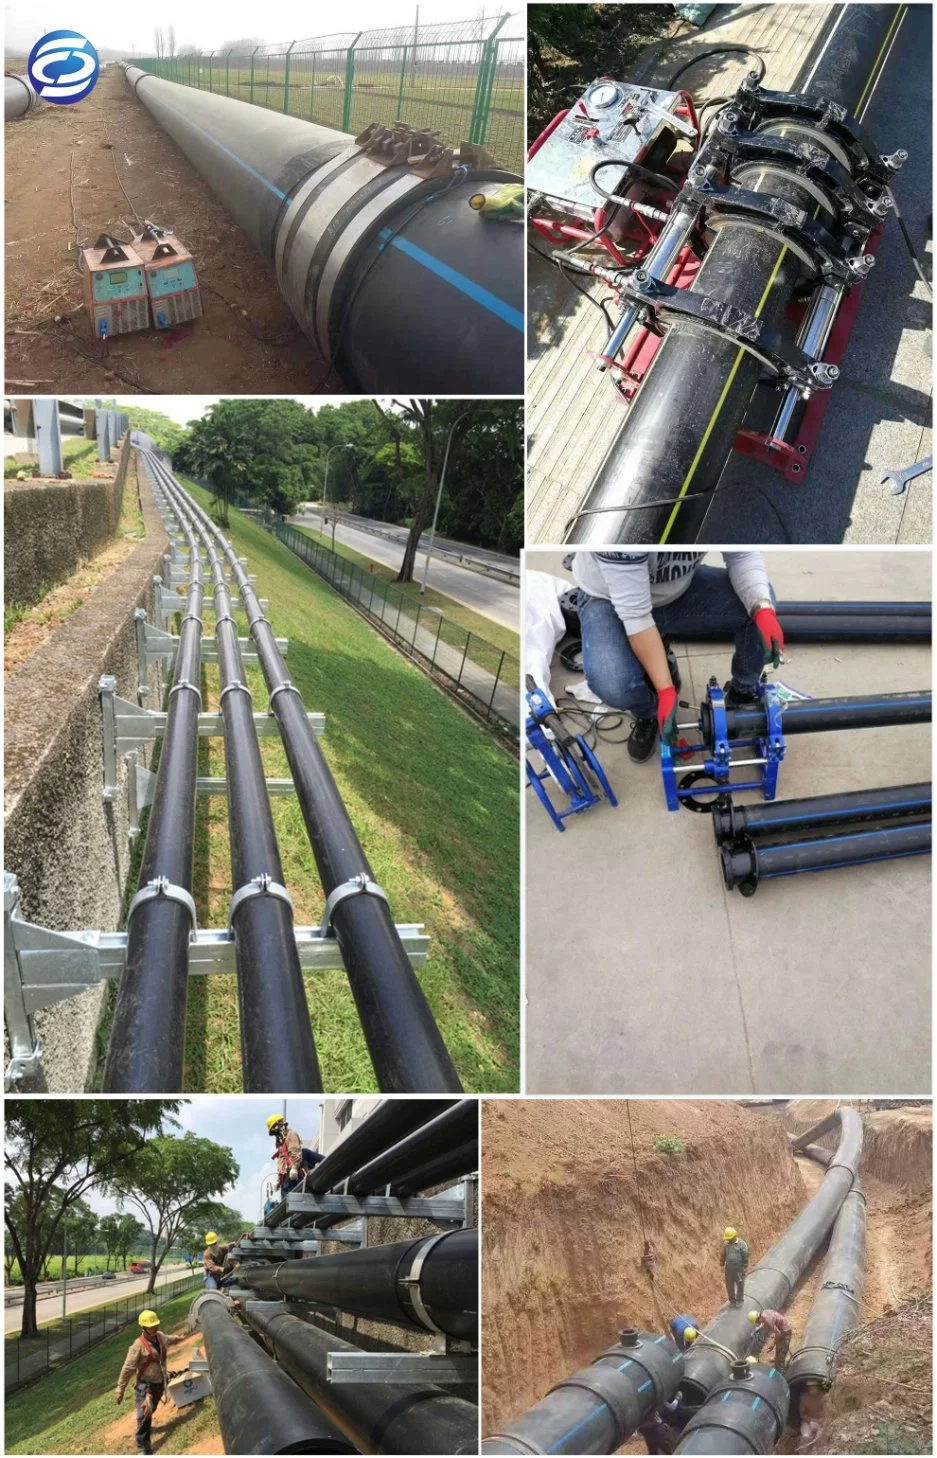 Pn10 Water Supply Tube Building Material PE HDPE Pipe for Construction/ISO Certificates/Cable/Chemical